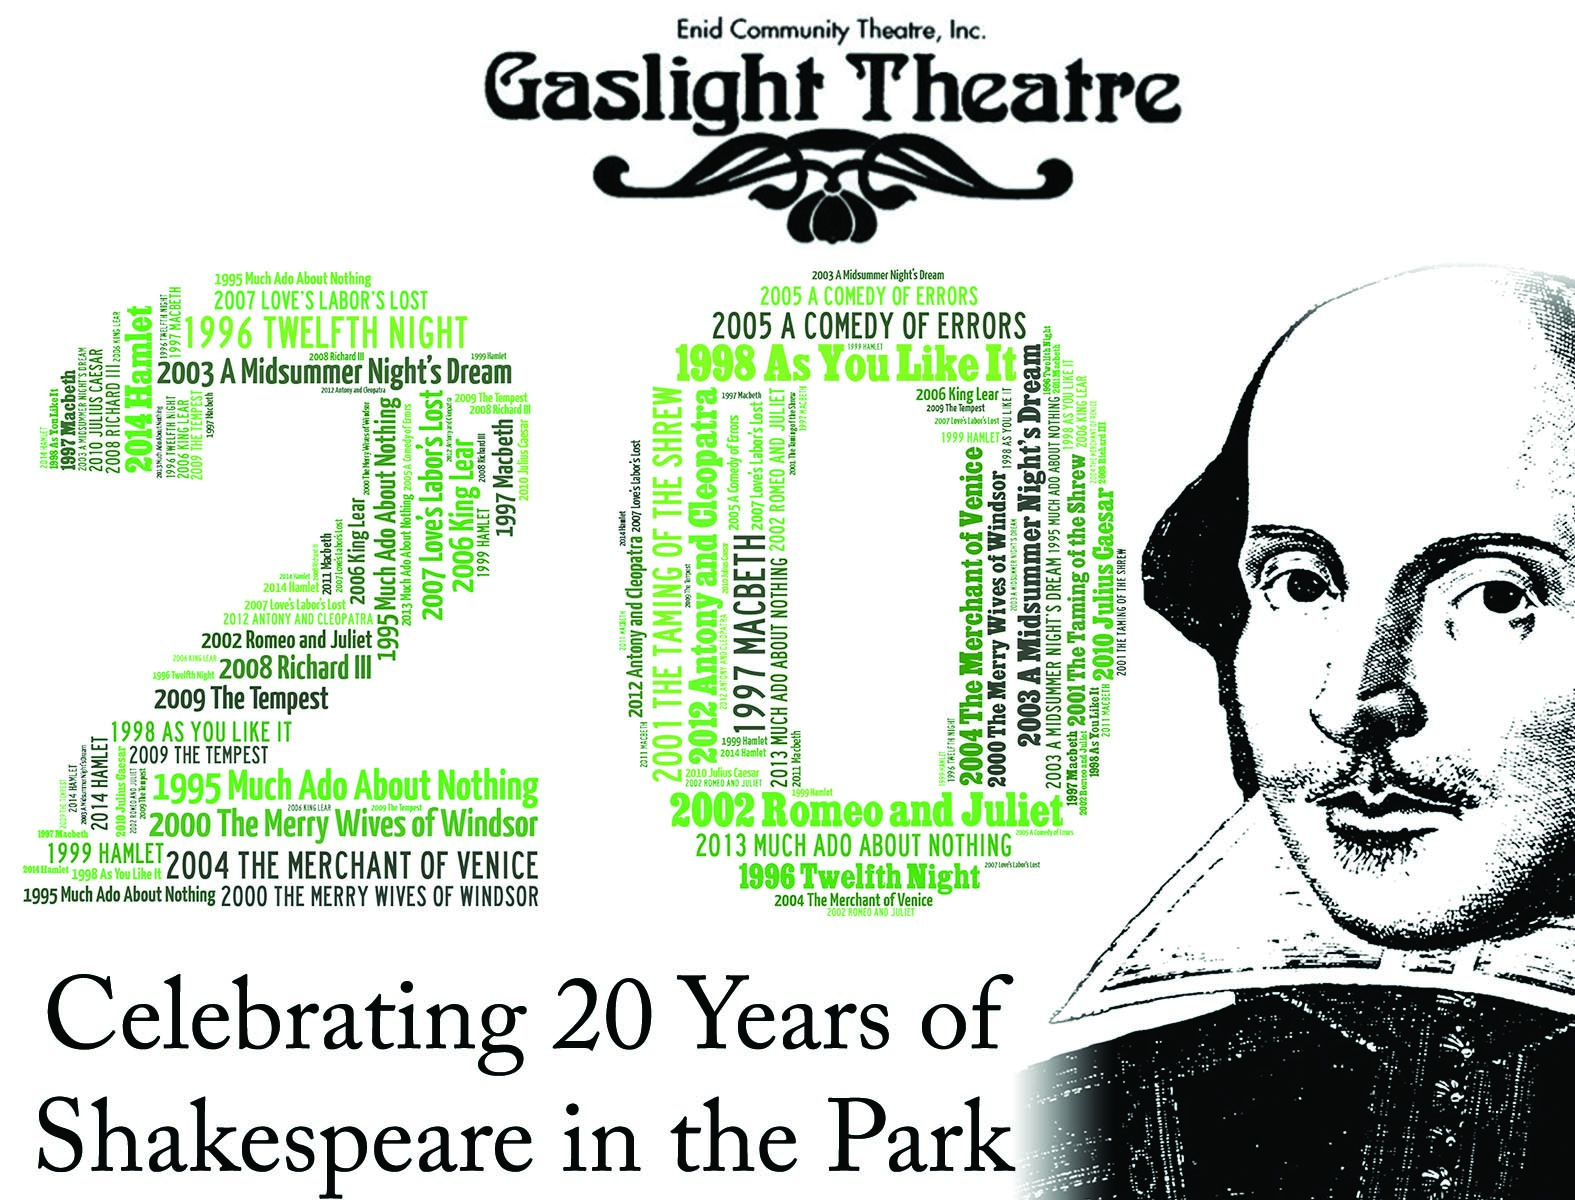 2014 Marked Our 20th Anniversary of Shakespeare in the Park